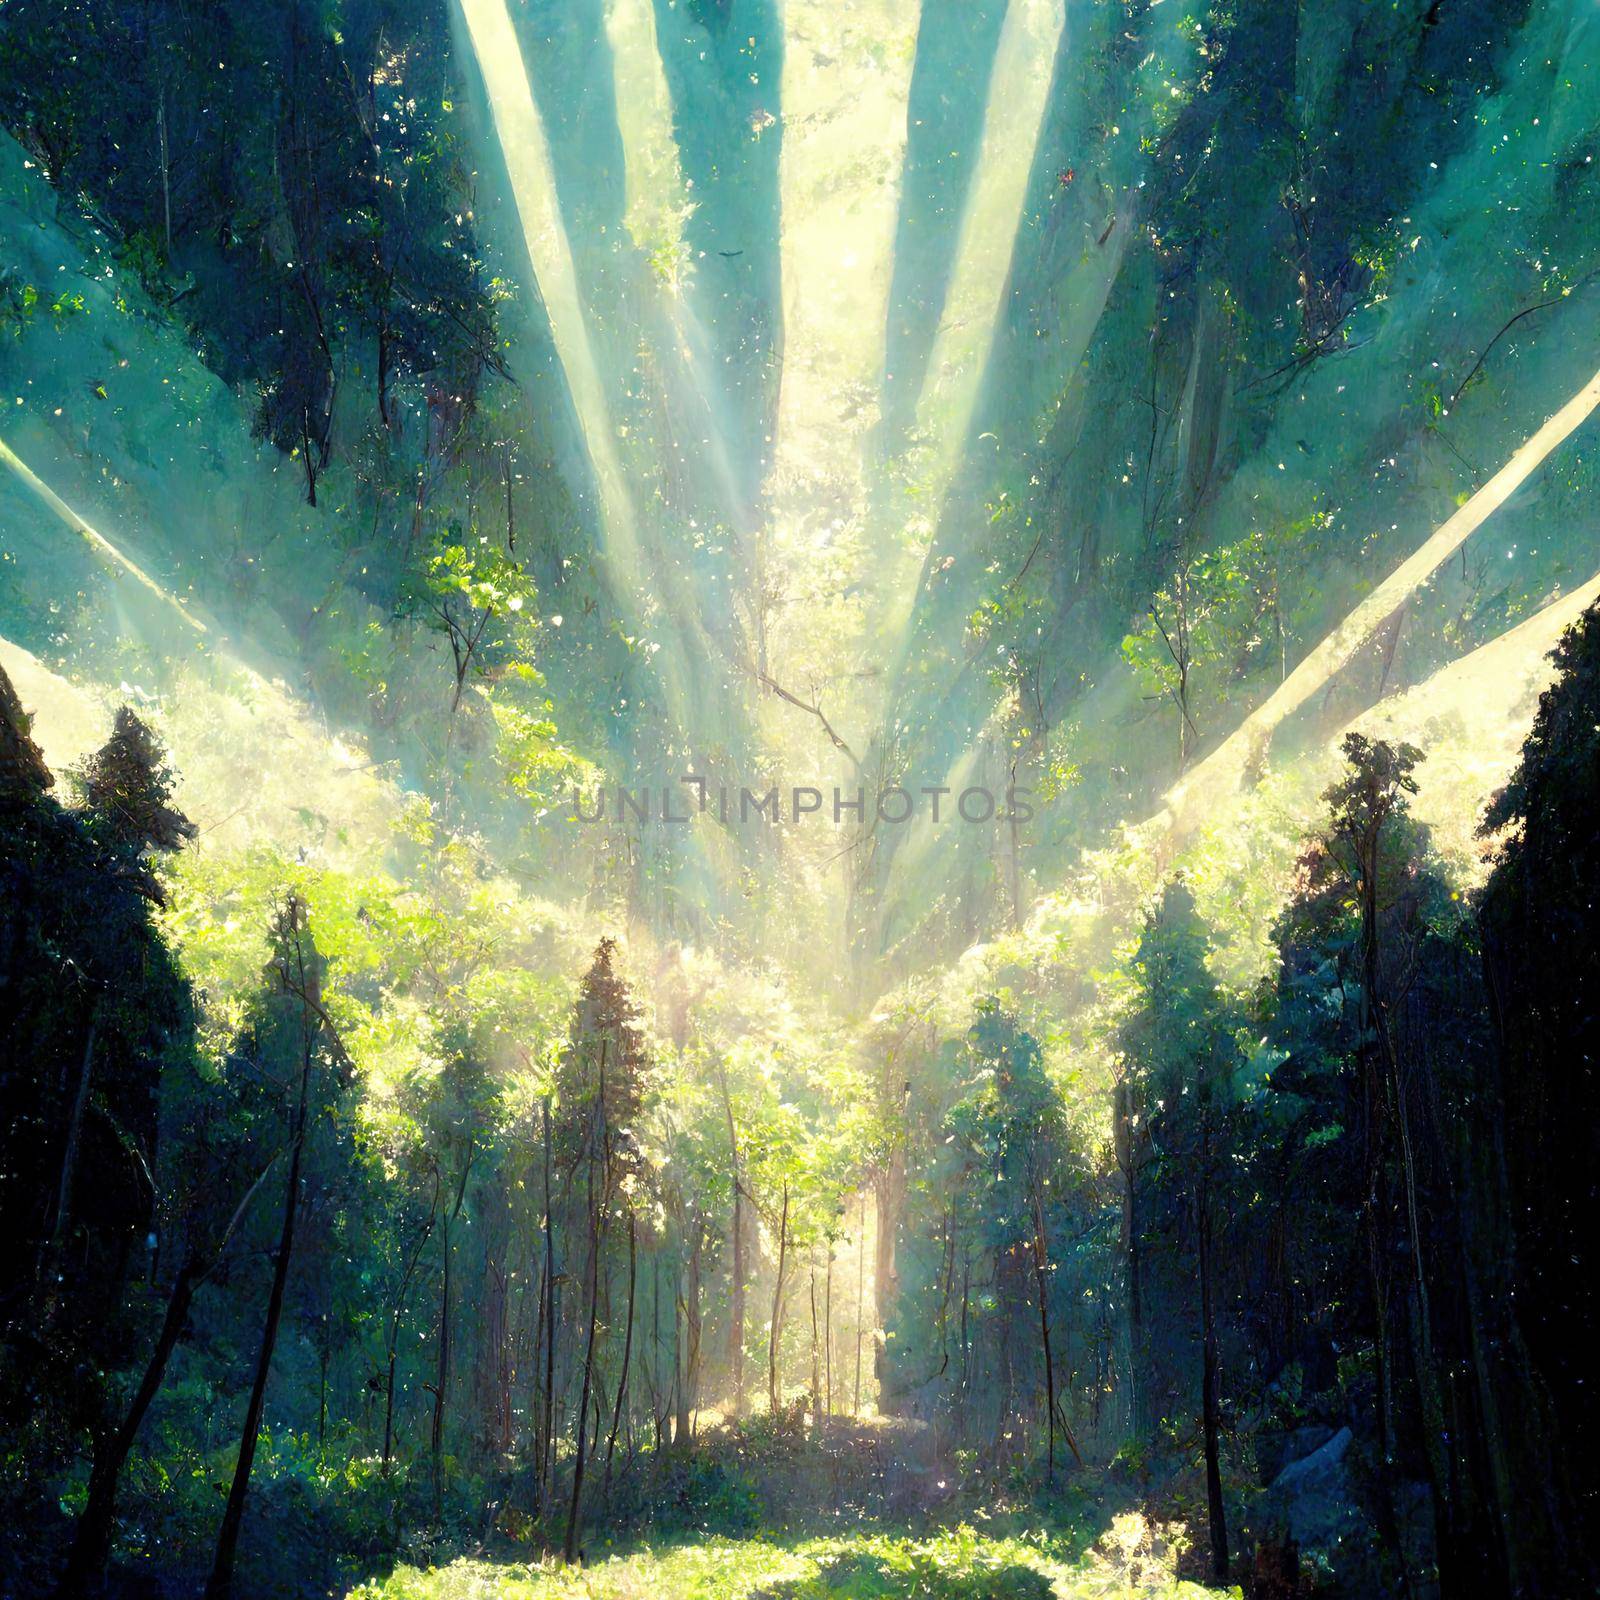 Light and forest - Day , Anime style, light rays by 2ragon